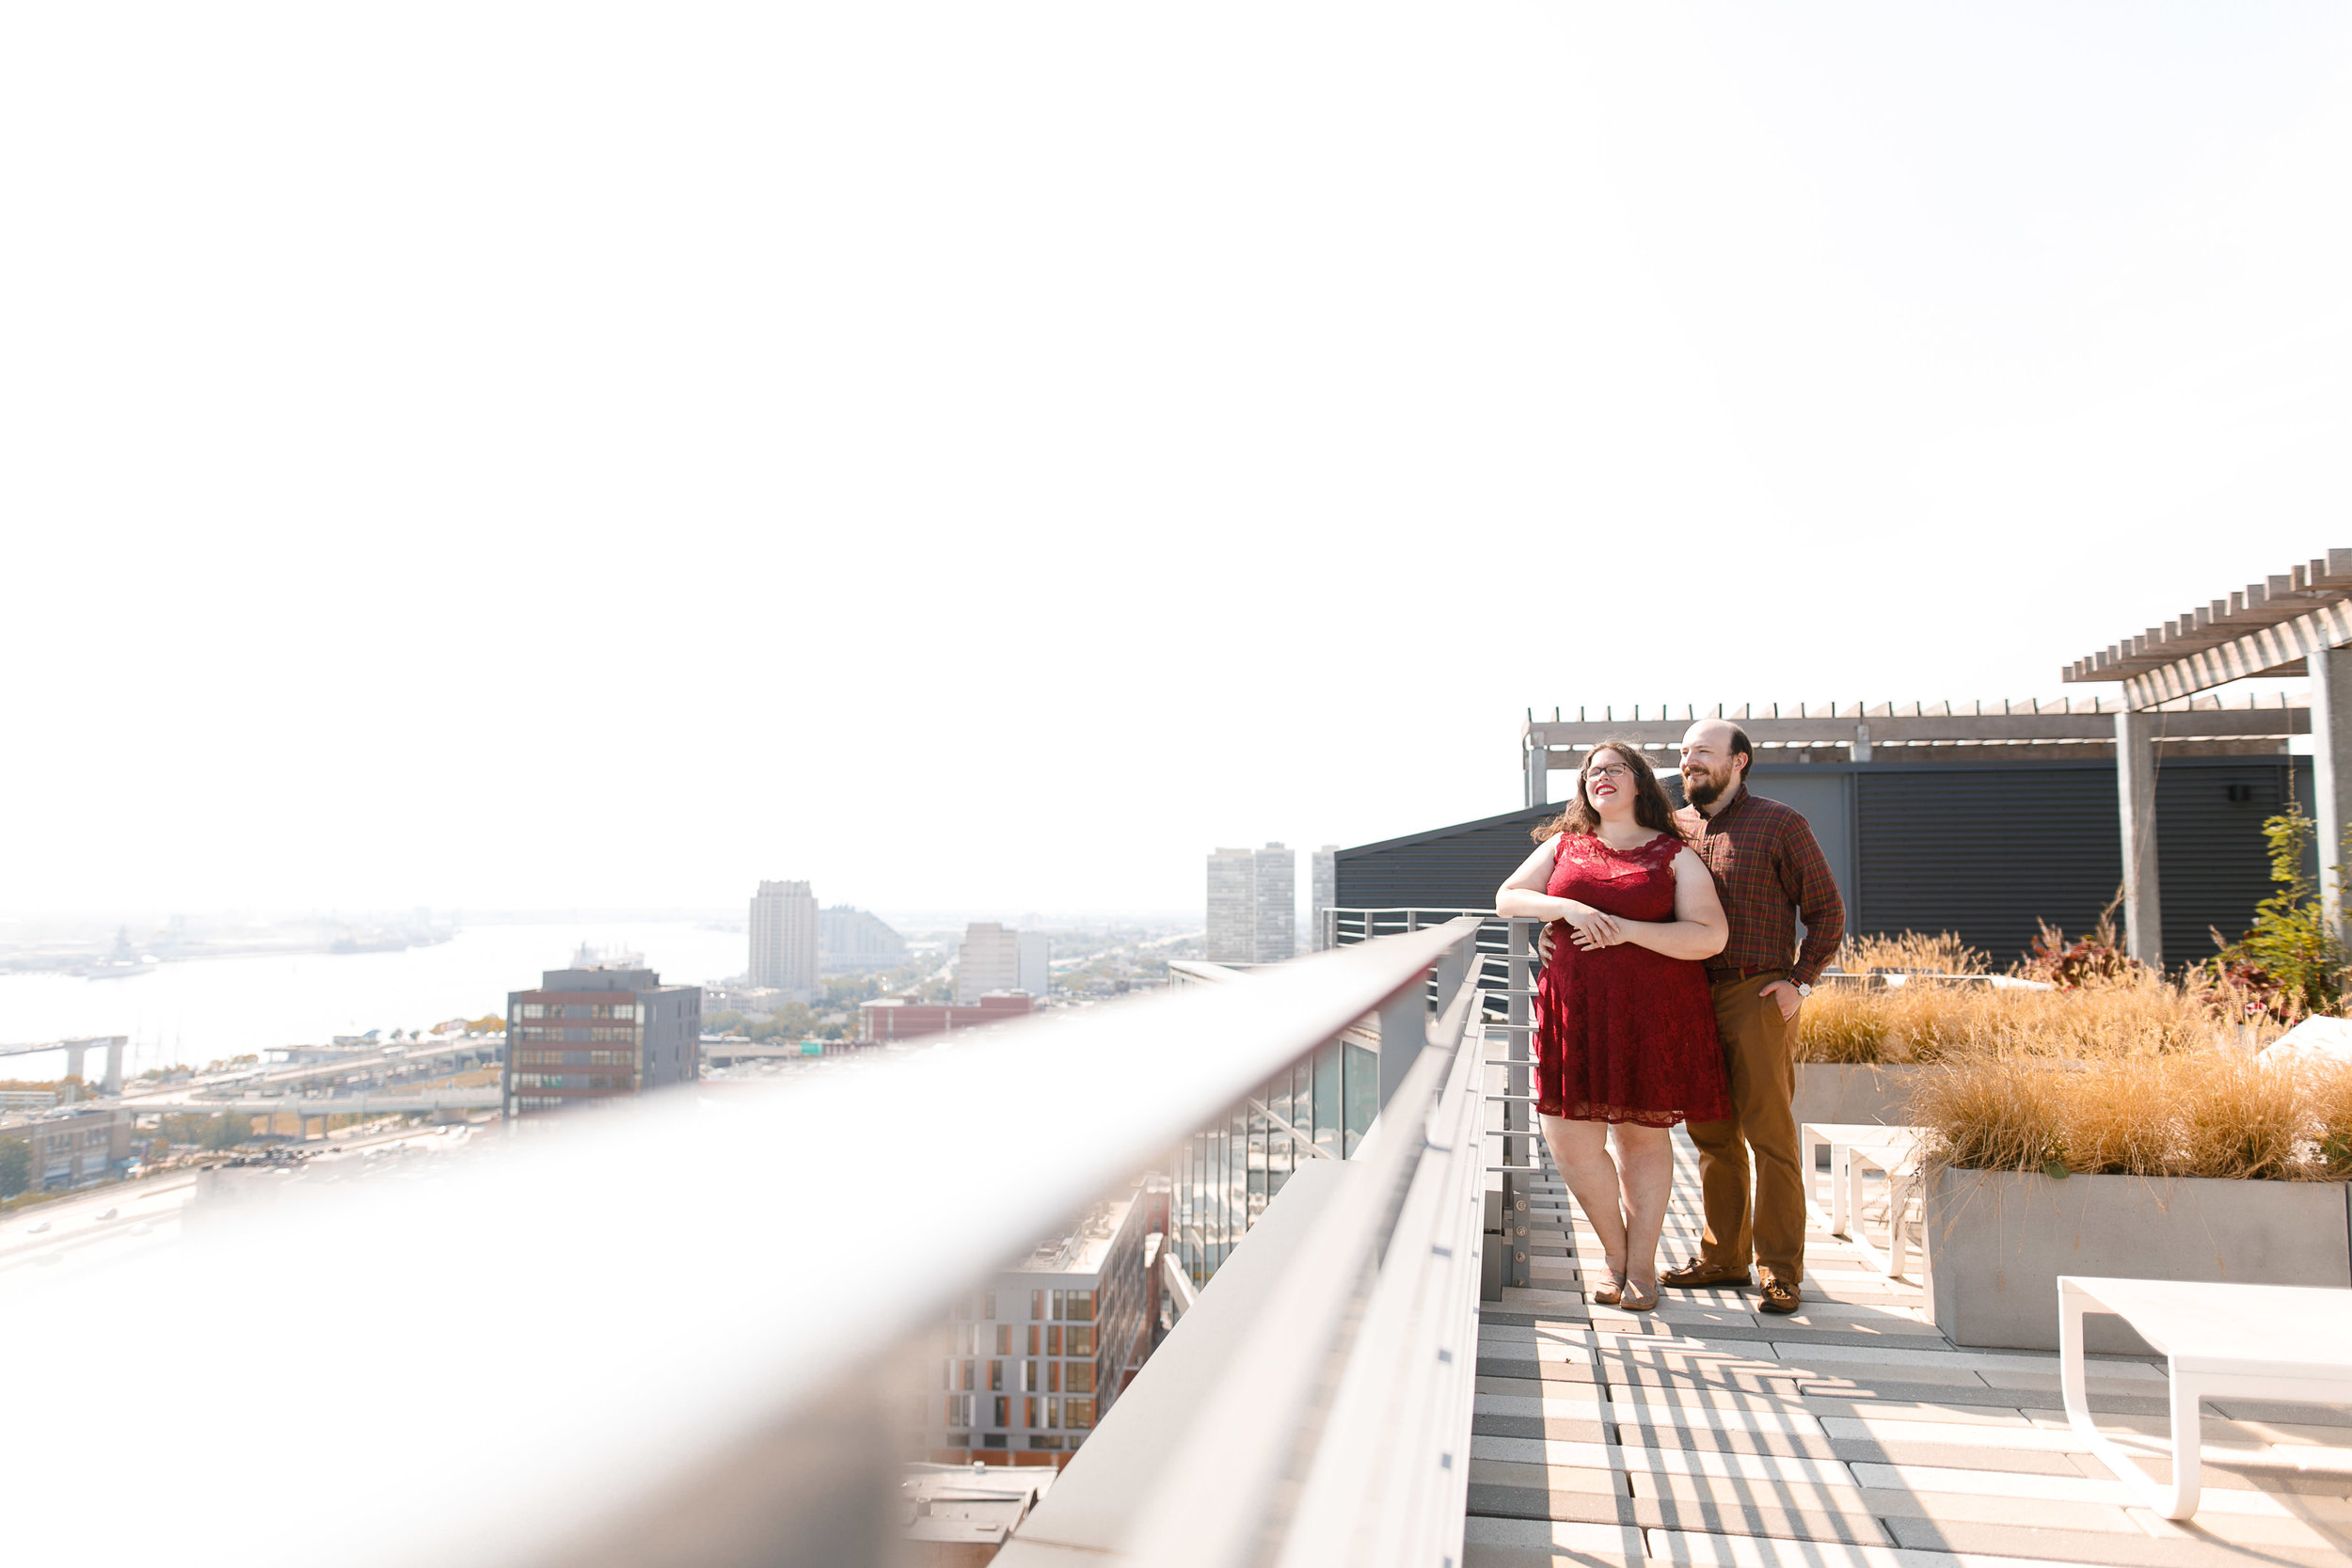 D&A Old City Philly Couples Session Photo Location Ideas 33.jpg